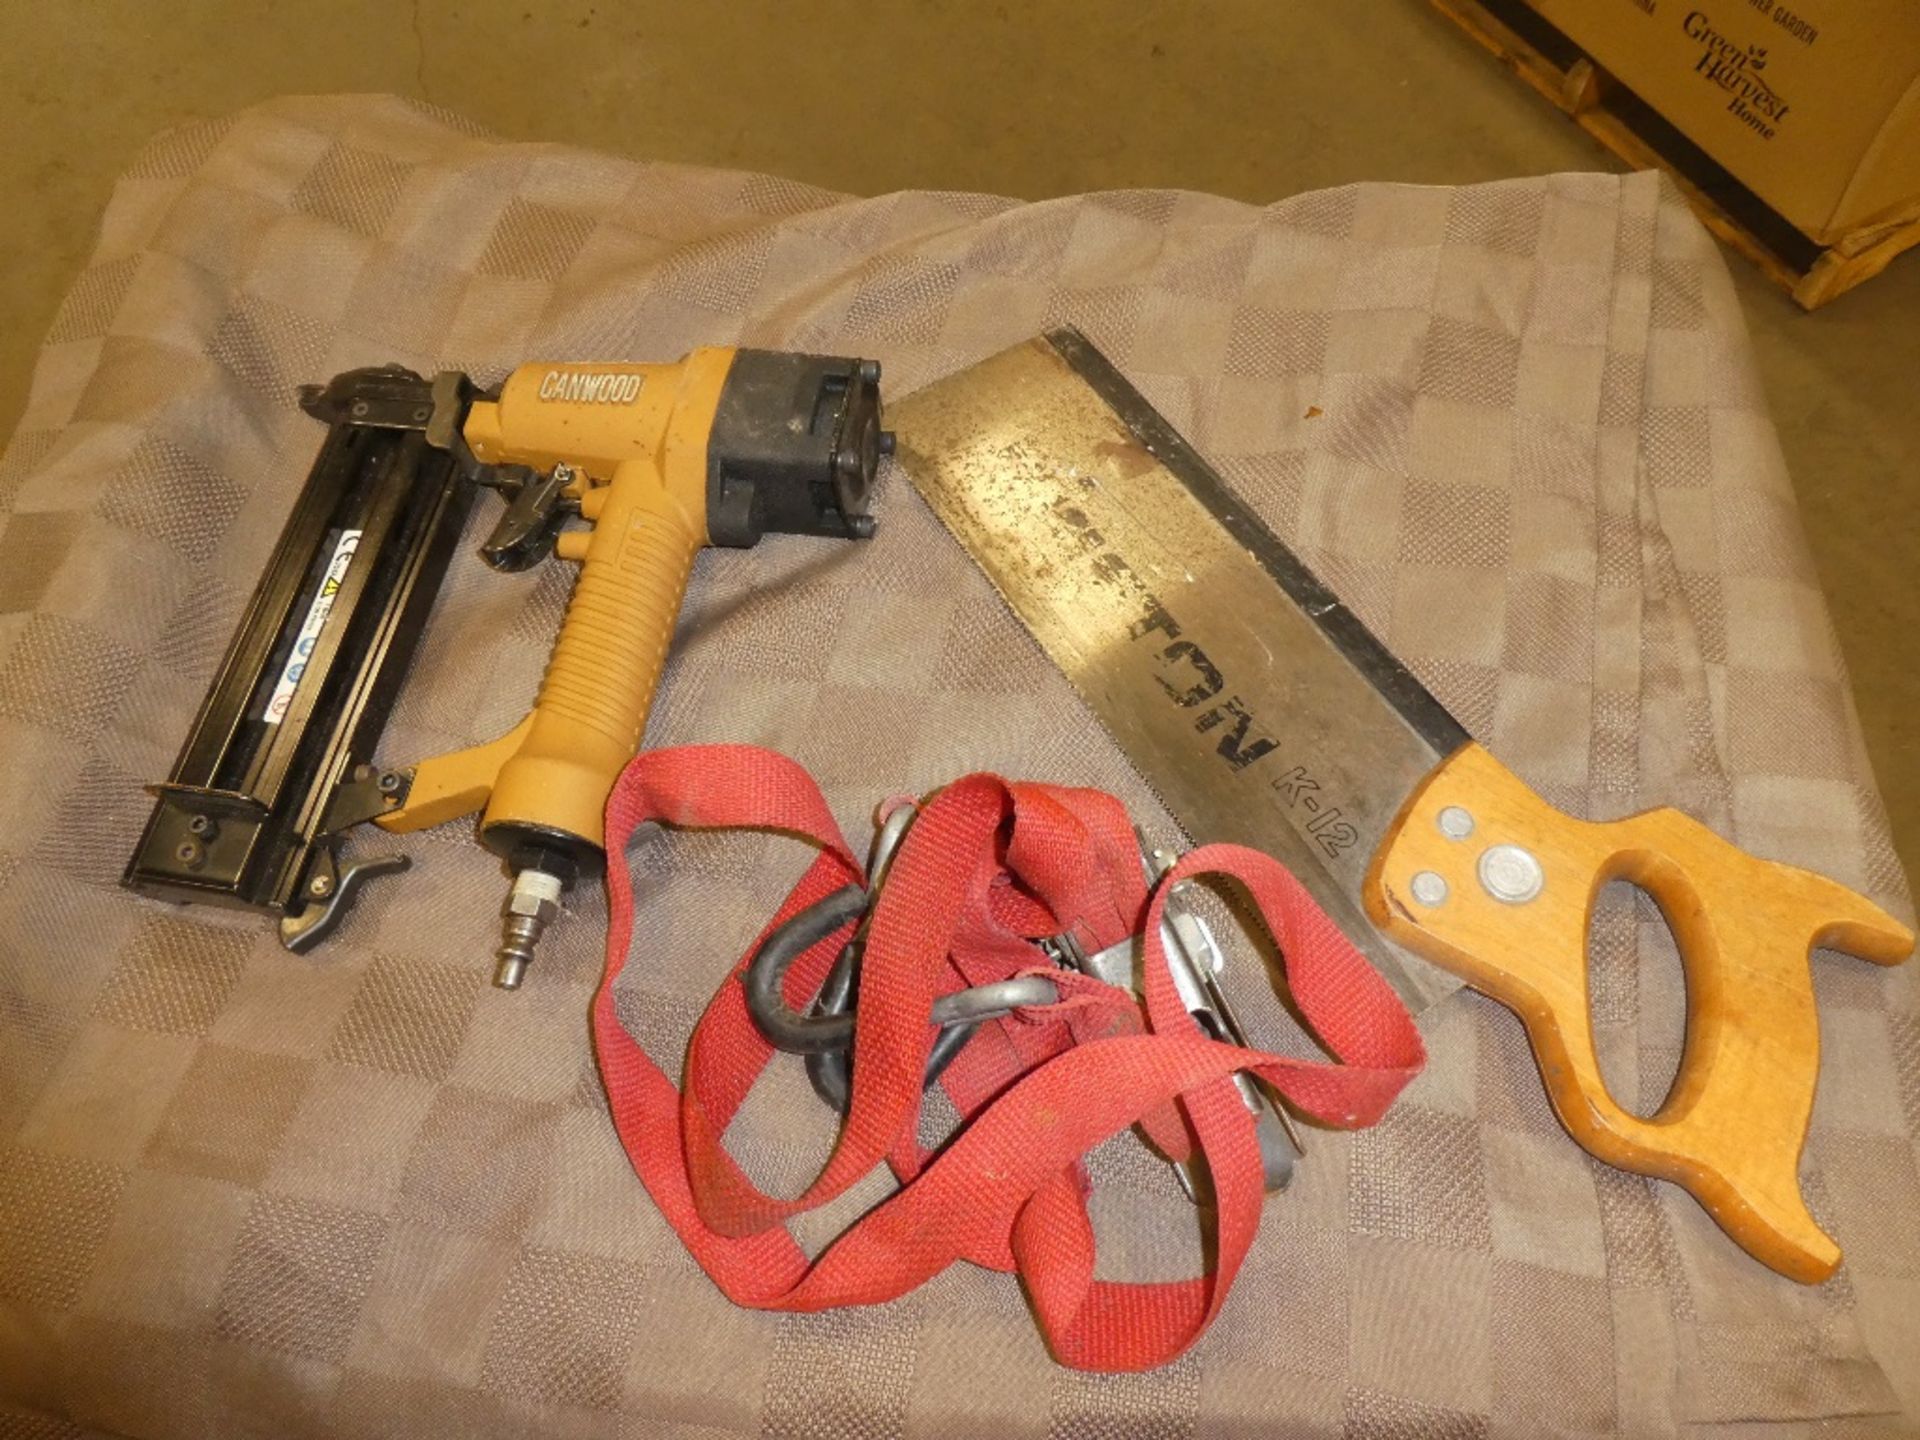 L/O ASSORTED HAND TOOLS CANWOOD AIR NAILER, MITER SAW, KNIVES, ETC. - Image 2 of 2